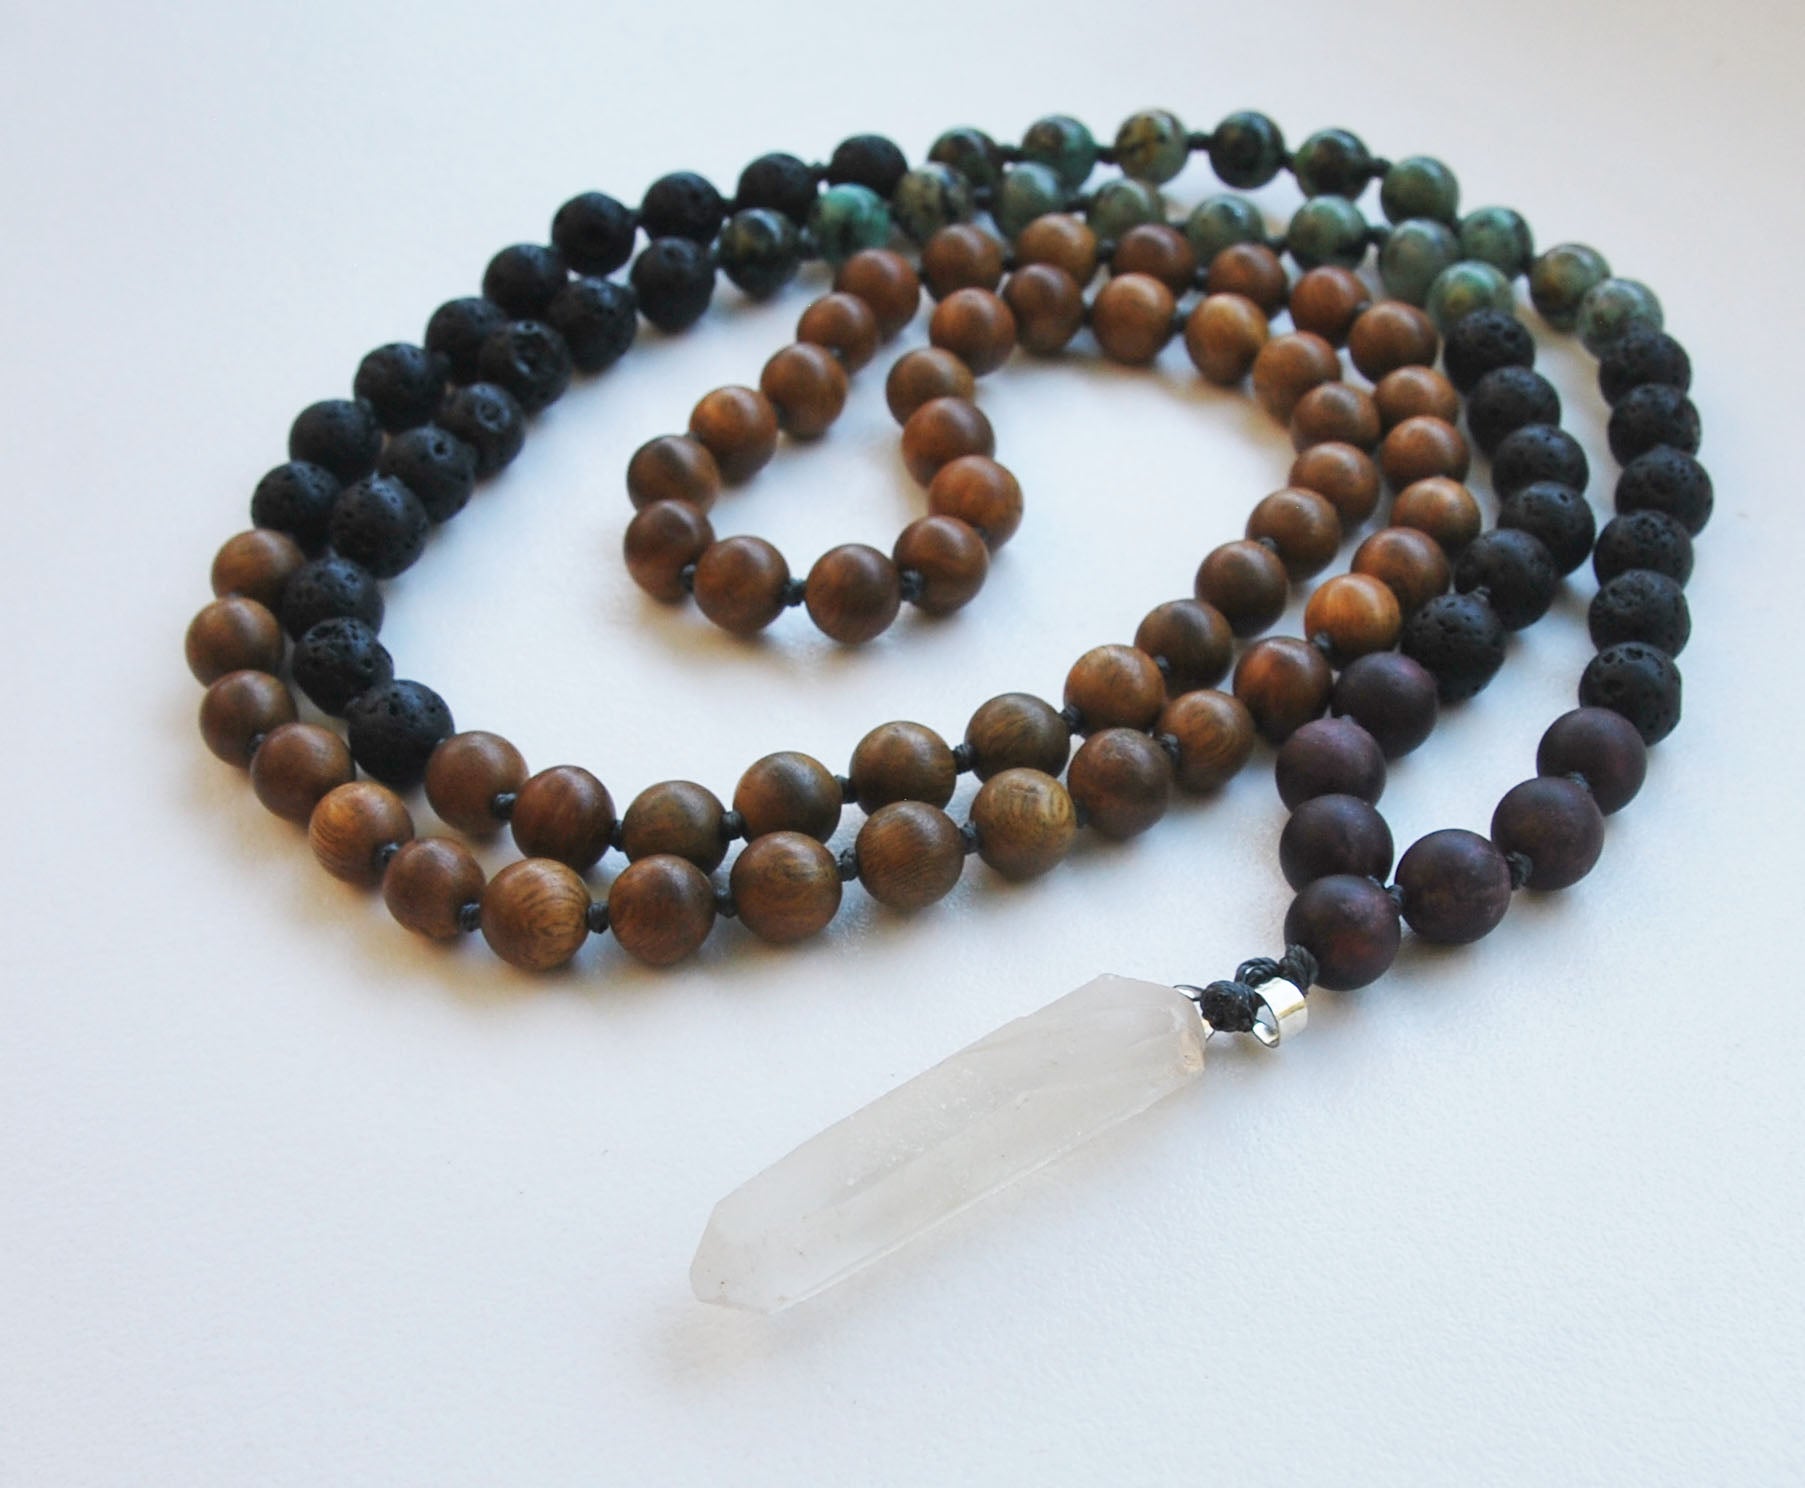 8mm Green Sandalwood & African Turquoise 108 Knotted Mala Necklace with Crystal Pendant